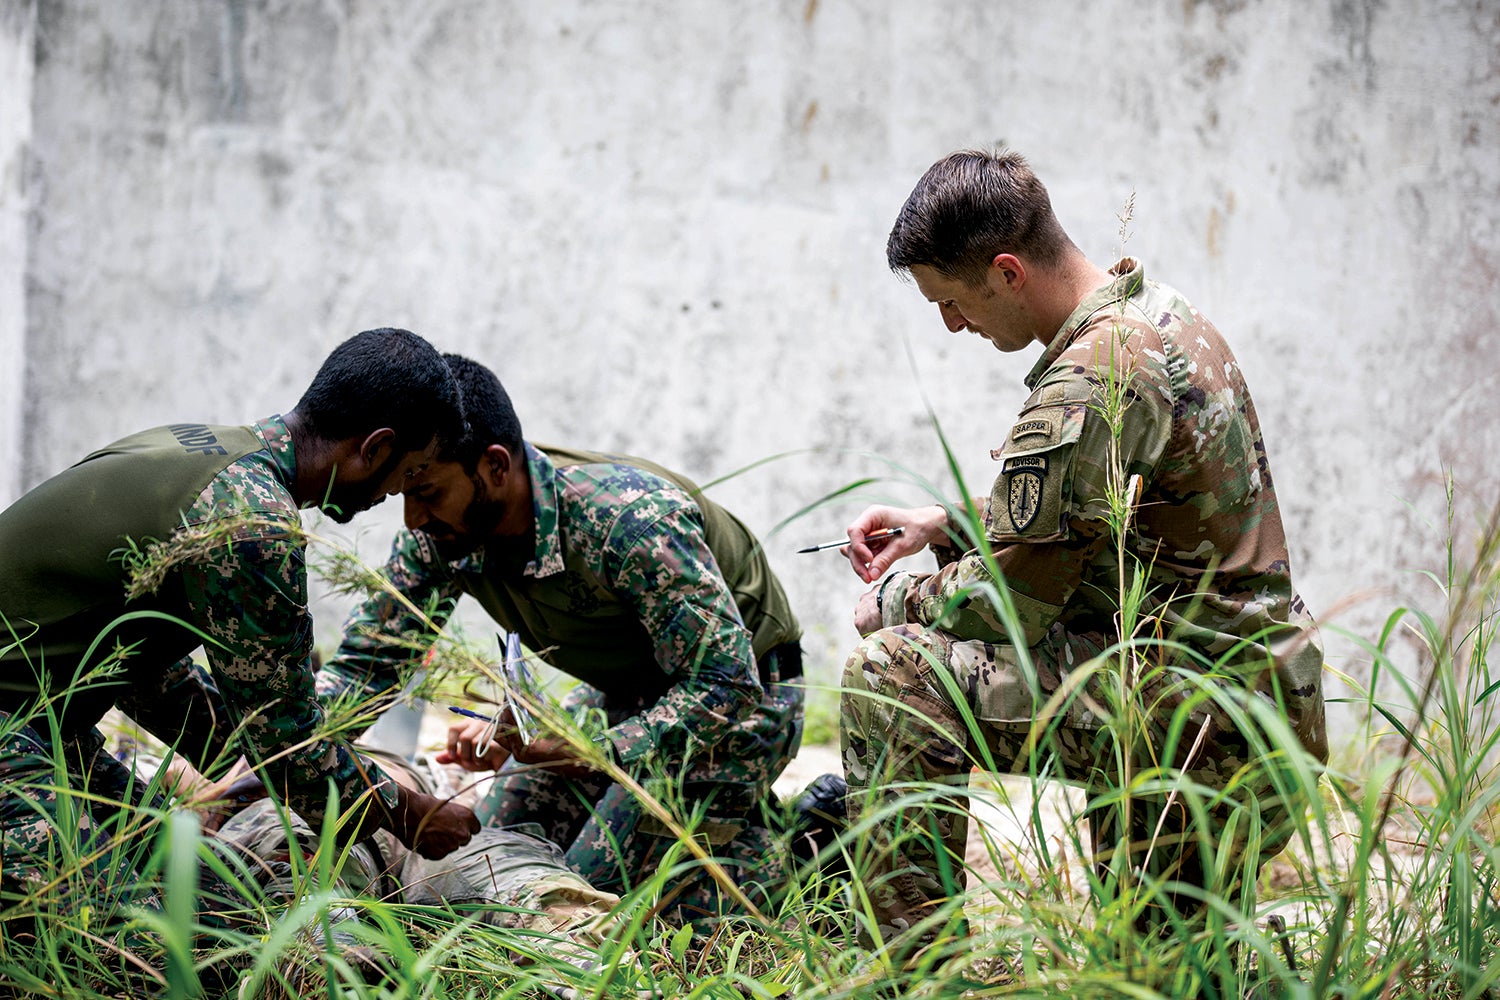 Staff Sgt. Warren Mohan, an adviser with the 5th Security Force Assistance Brigade, observes as members of the Maldives National Defense Force demonstrate tactical field care in Kahdhoo, Maldives. (Credit: U.S. Army/Spc. Jacob Núñez)